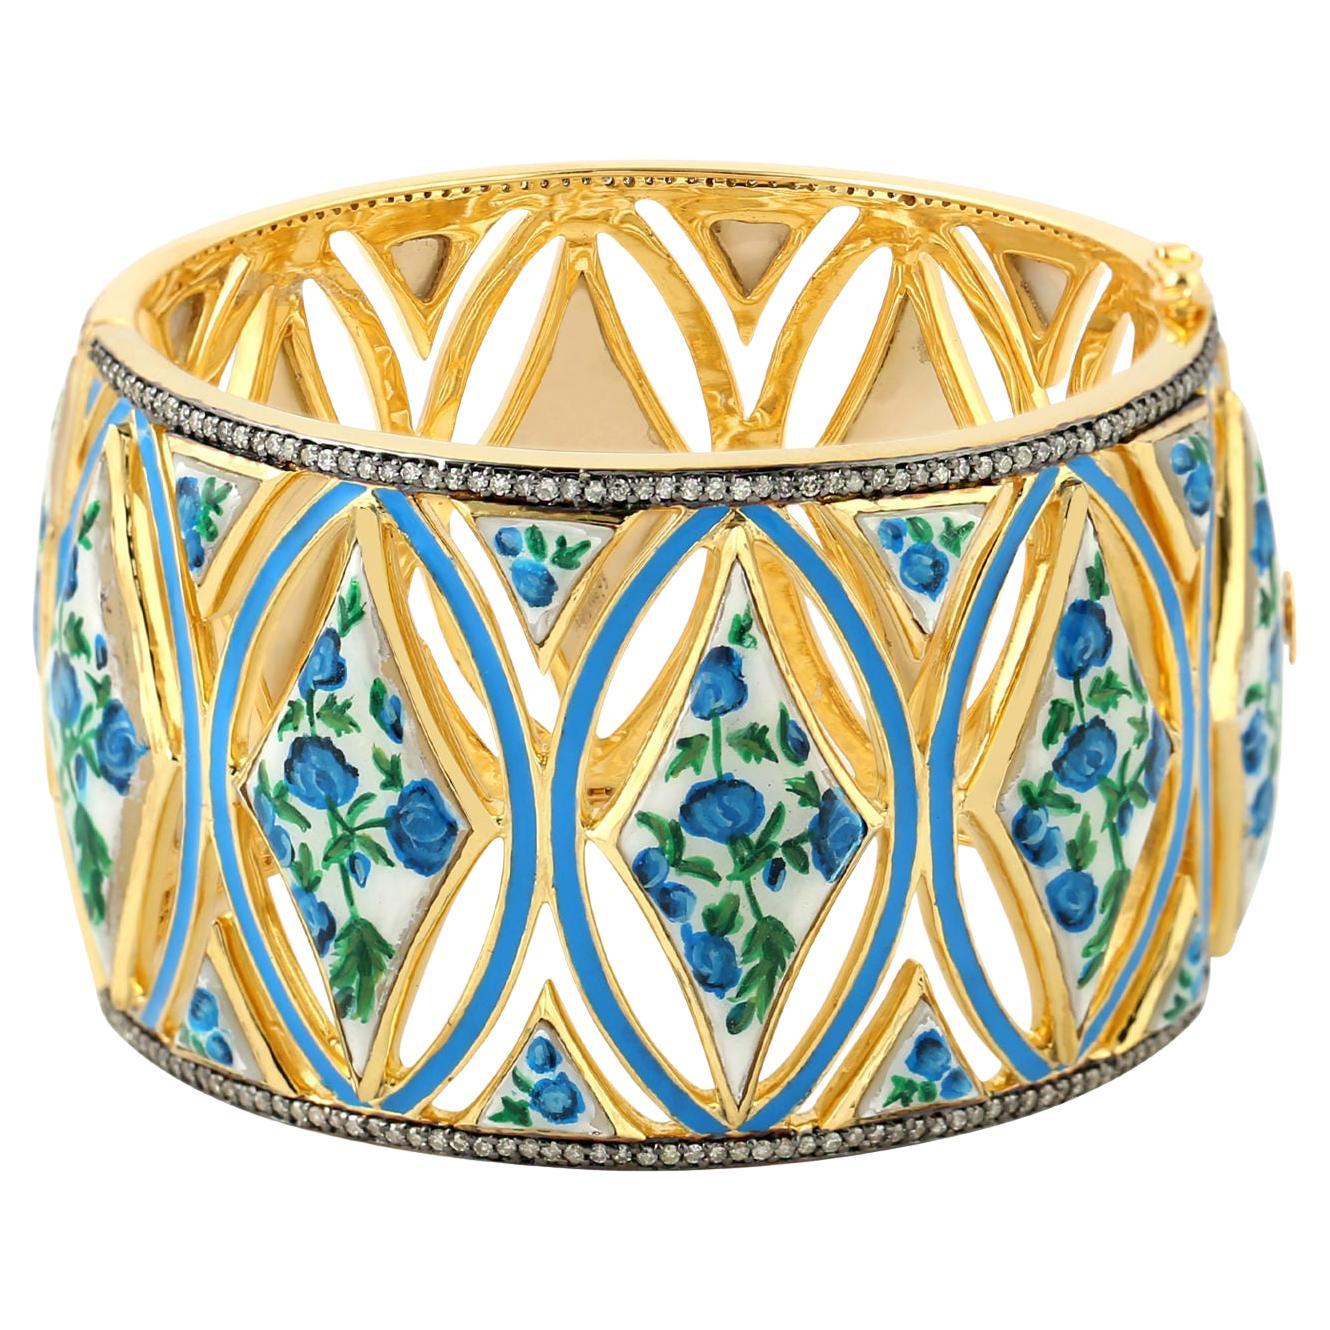 Hand Painted Flower Enamel On Tall Cuff With MOP & Diamonds In 18k Yellow Gold